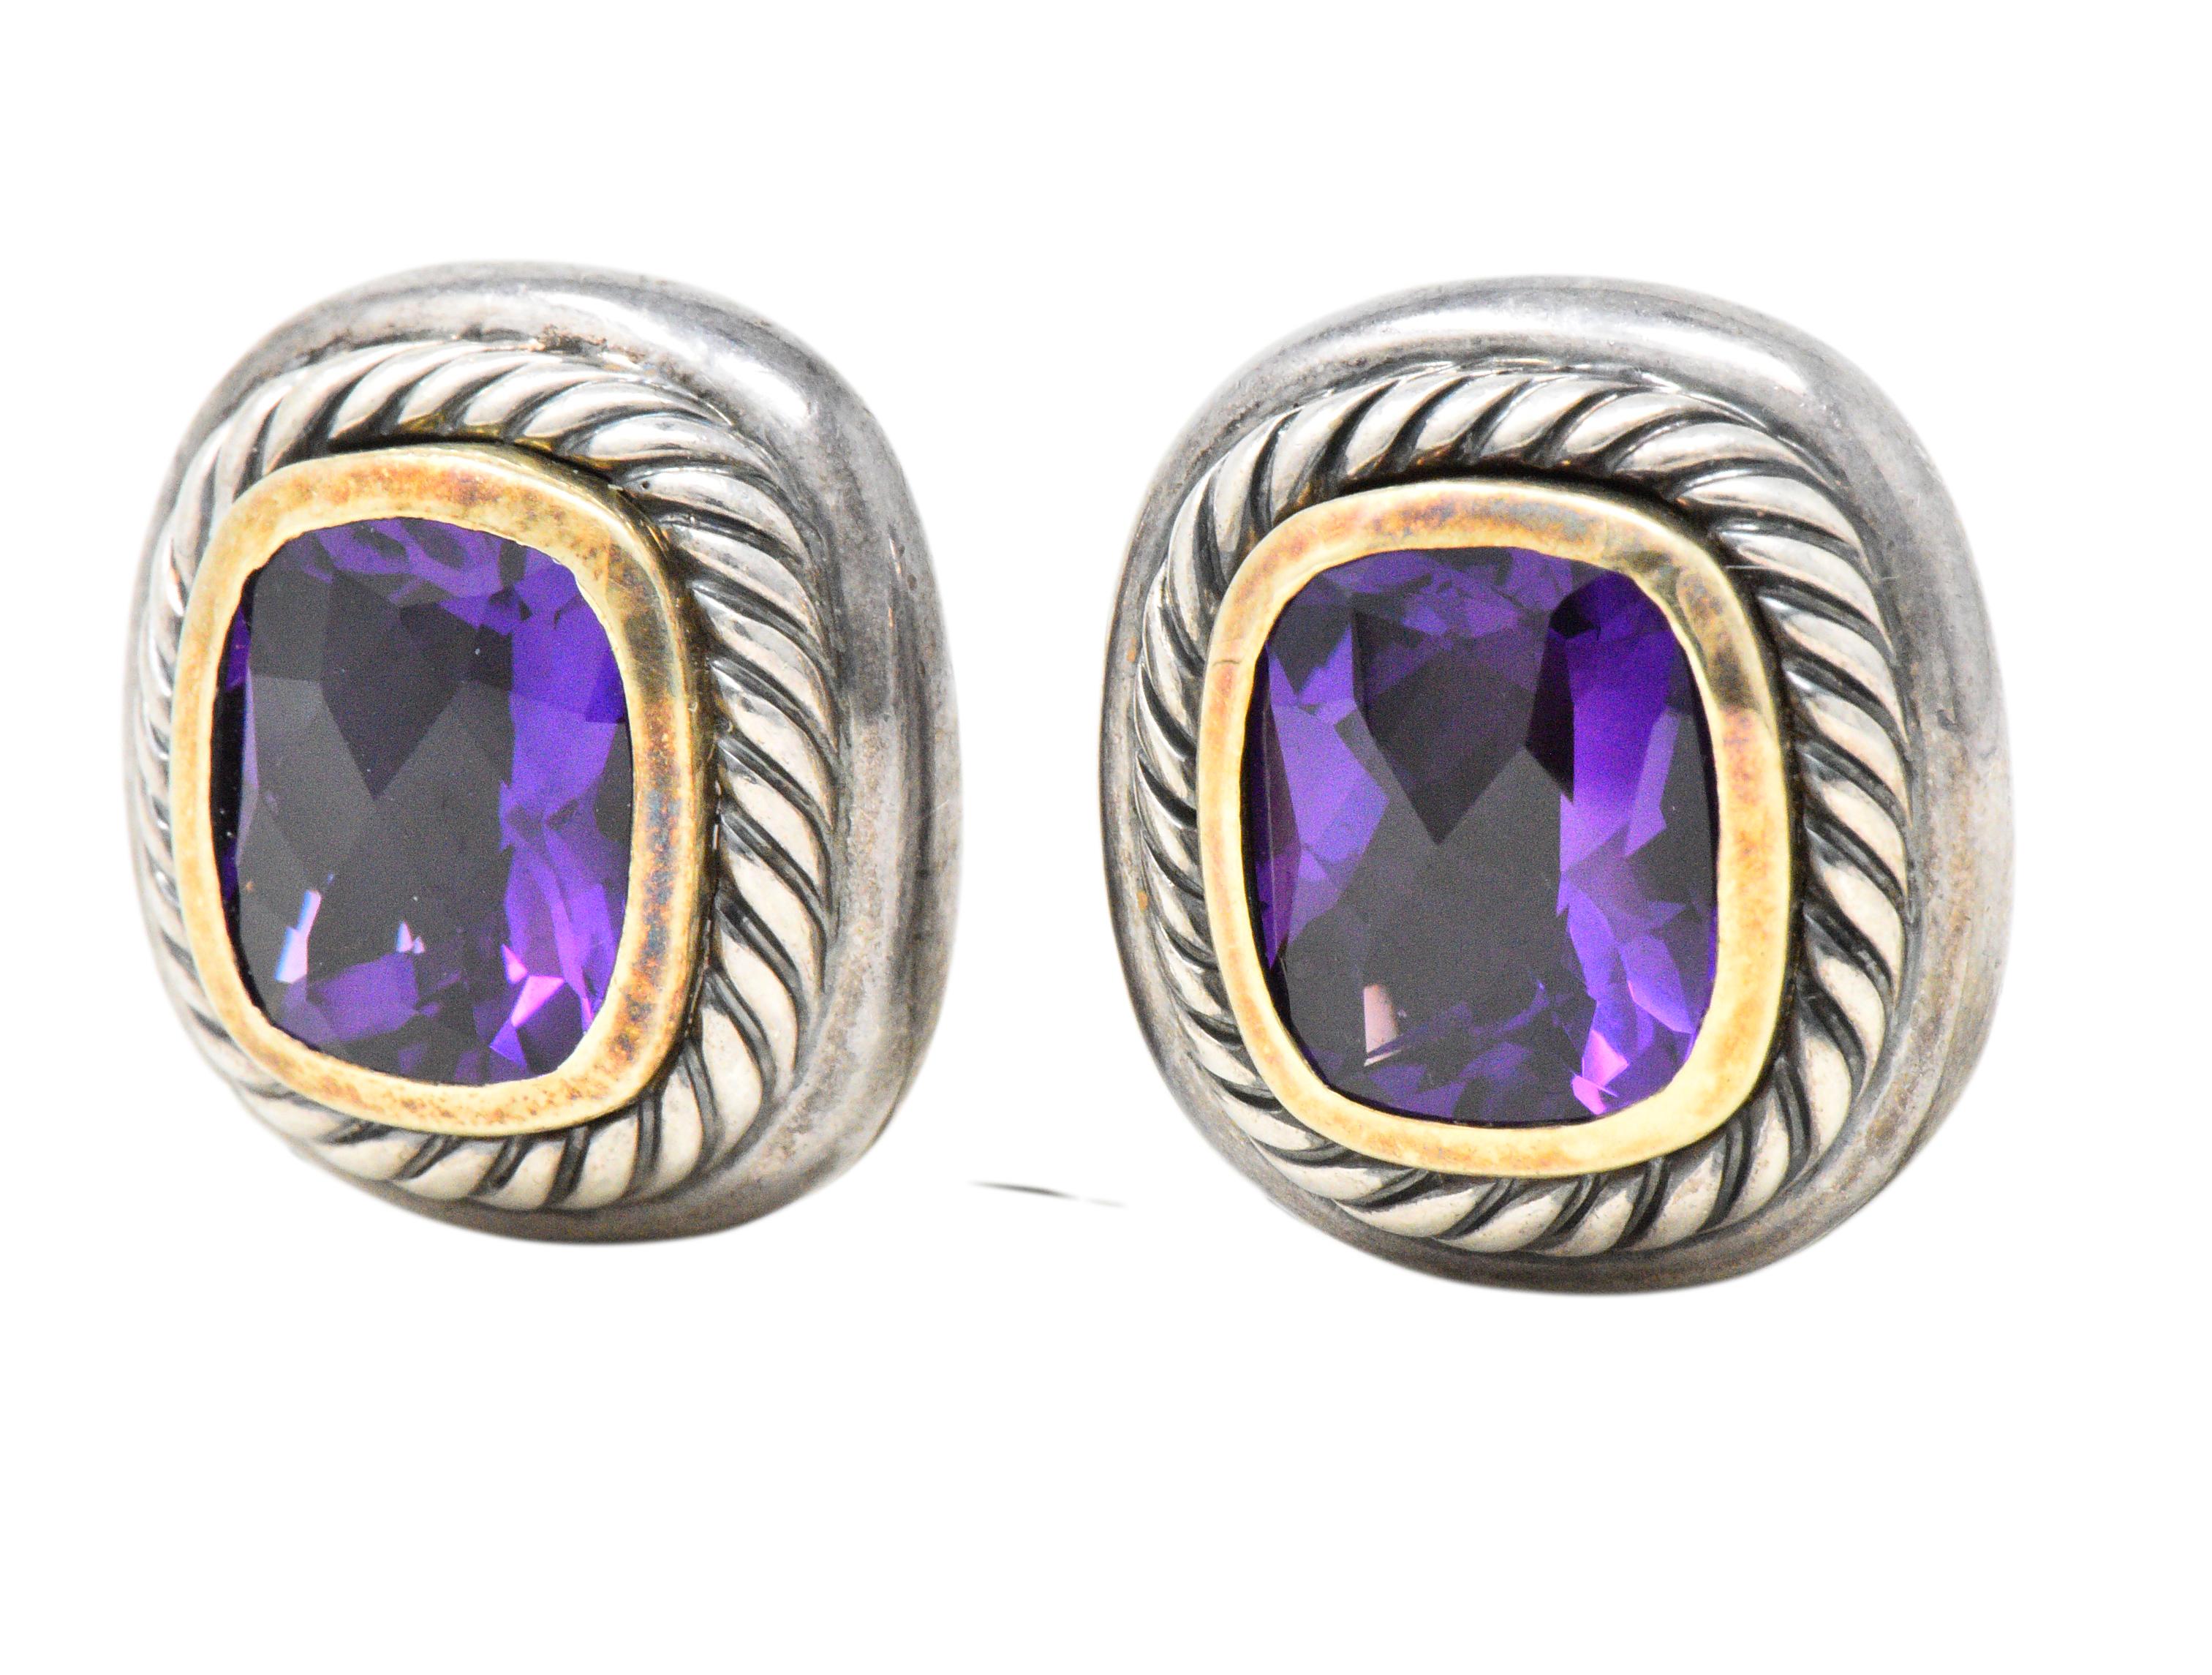 Each featuring a faceted vivid amethyst, bezel set in 14K yellow gold

Amethyst measure approximately 12.23 mm x 9.9 mm 

Accented by sterling silver twisted rope

Stamped .925, 585 and Signed D.Y. for David Yurman 

Omega back

Measures: 21.2 mm